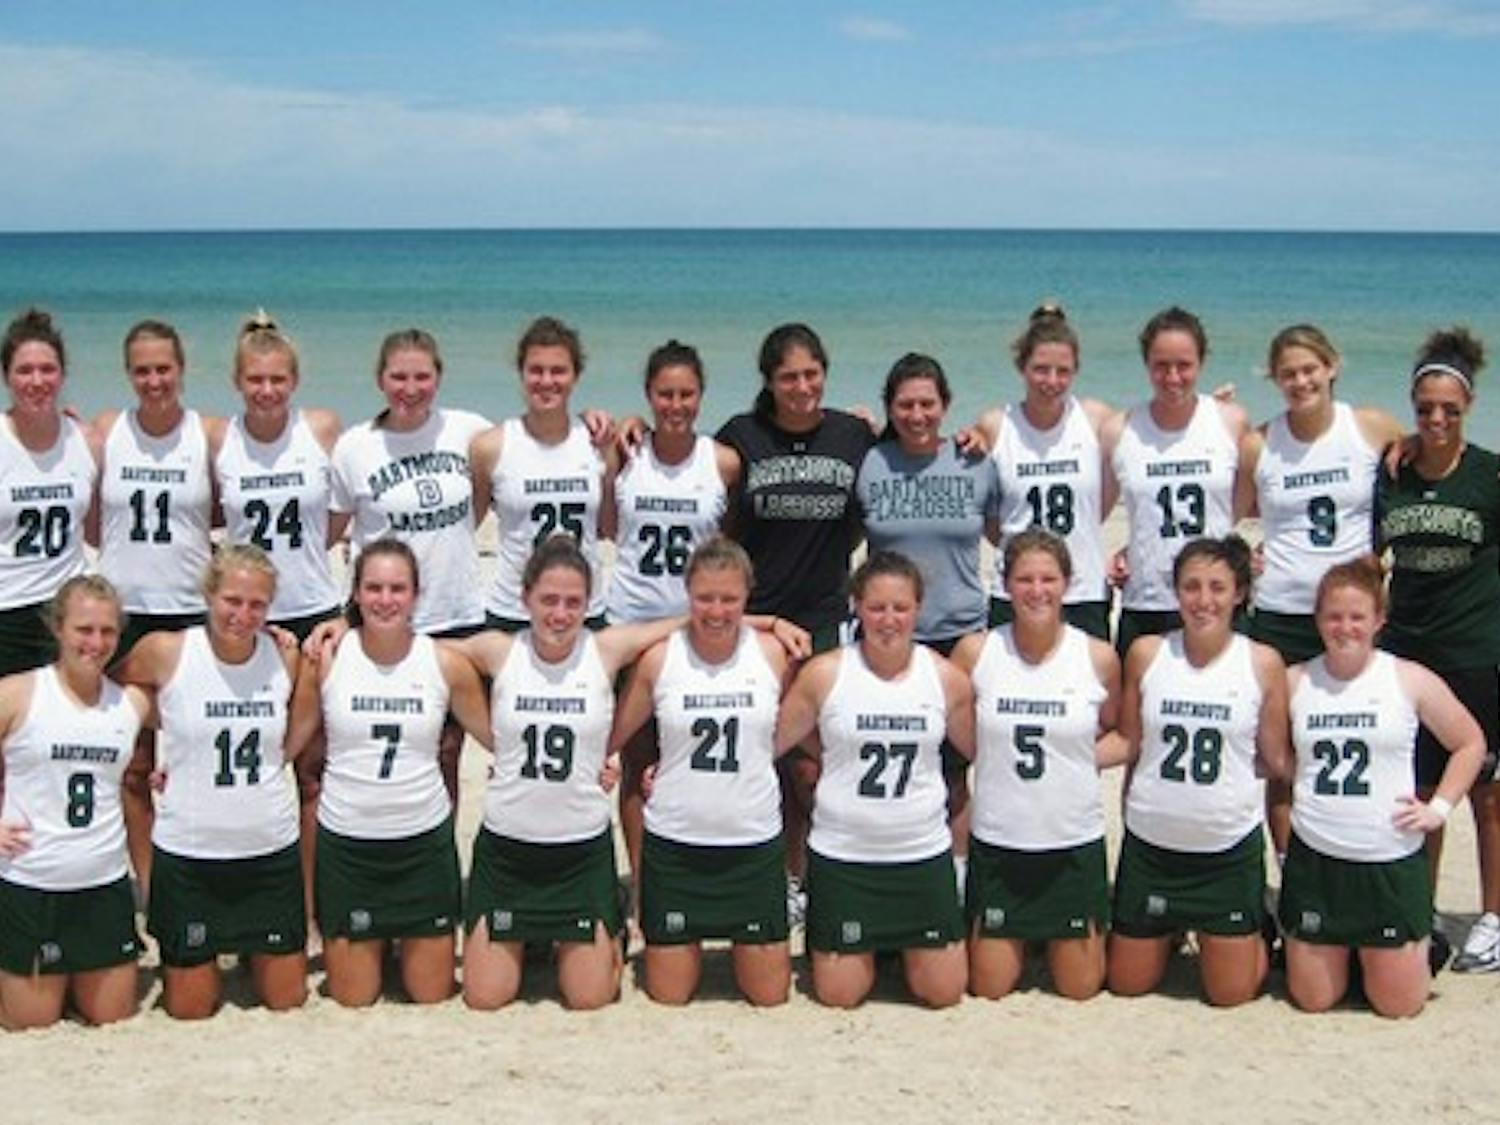 The Big Green women's lacrosse team visits a beach between matches during their winter break trip to Australia.